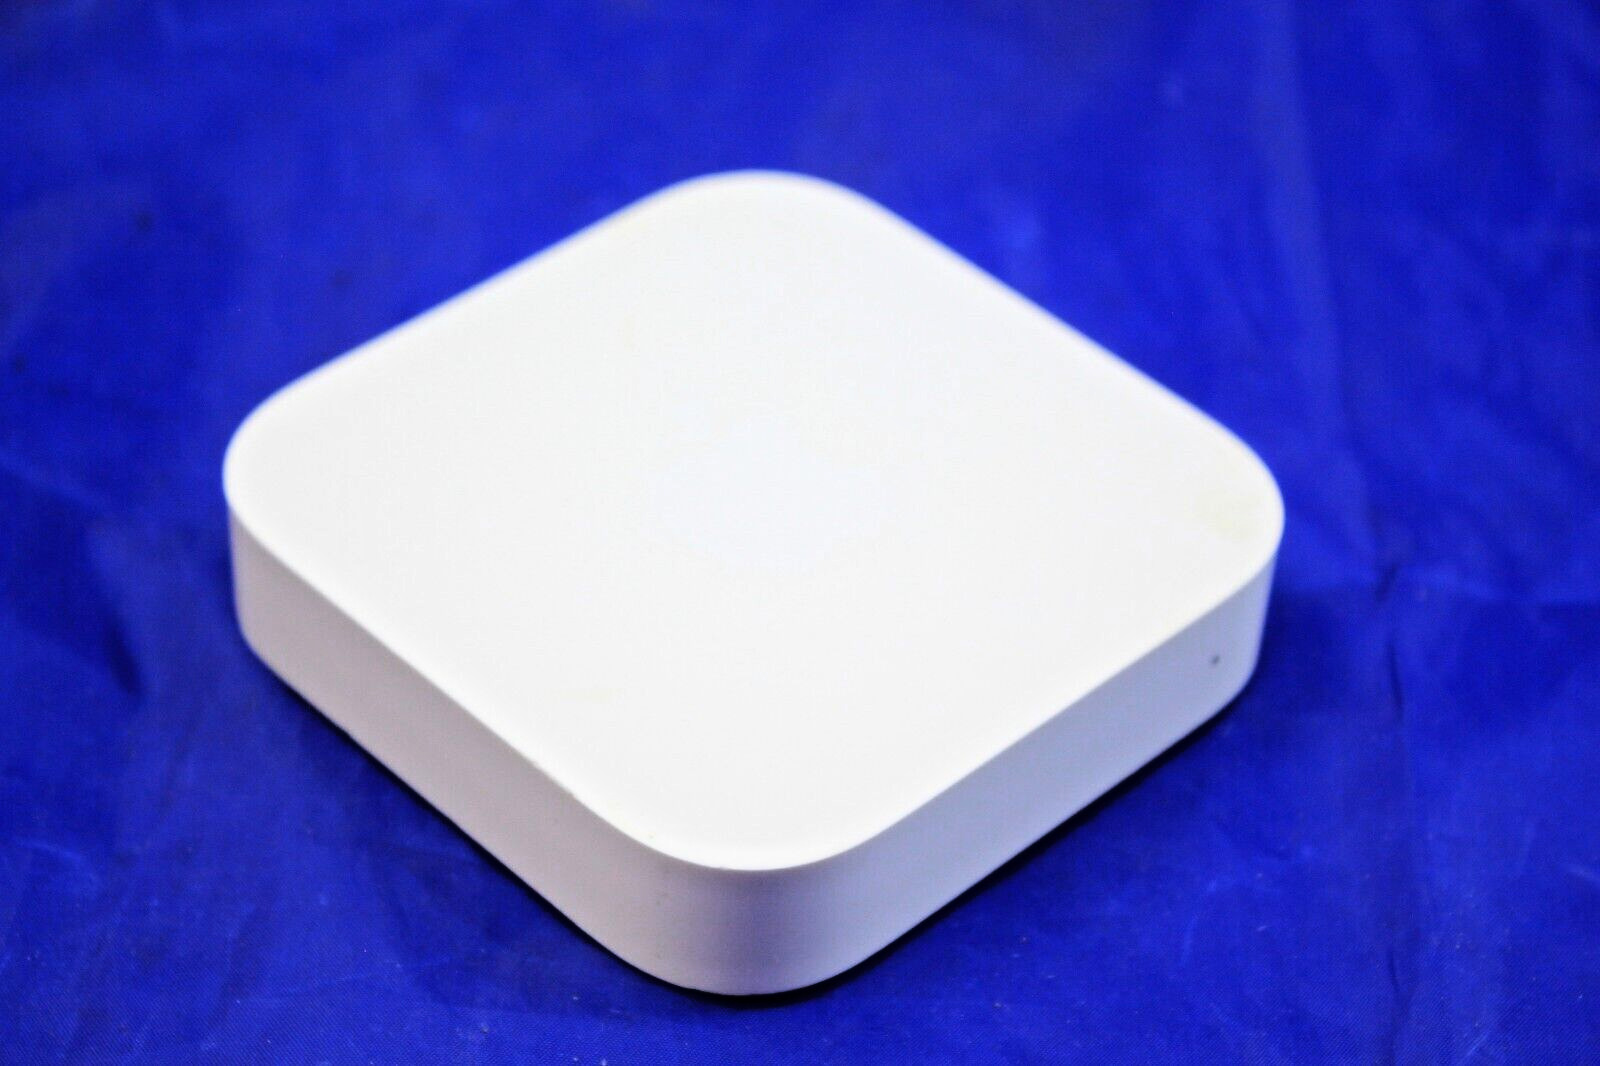 Apple AirPort Express 2nd Gen A1392 Dual-Band Wireless WiFi Router